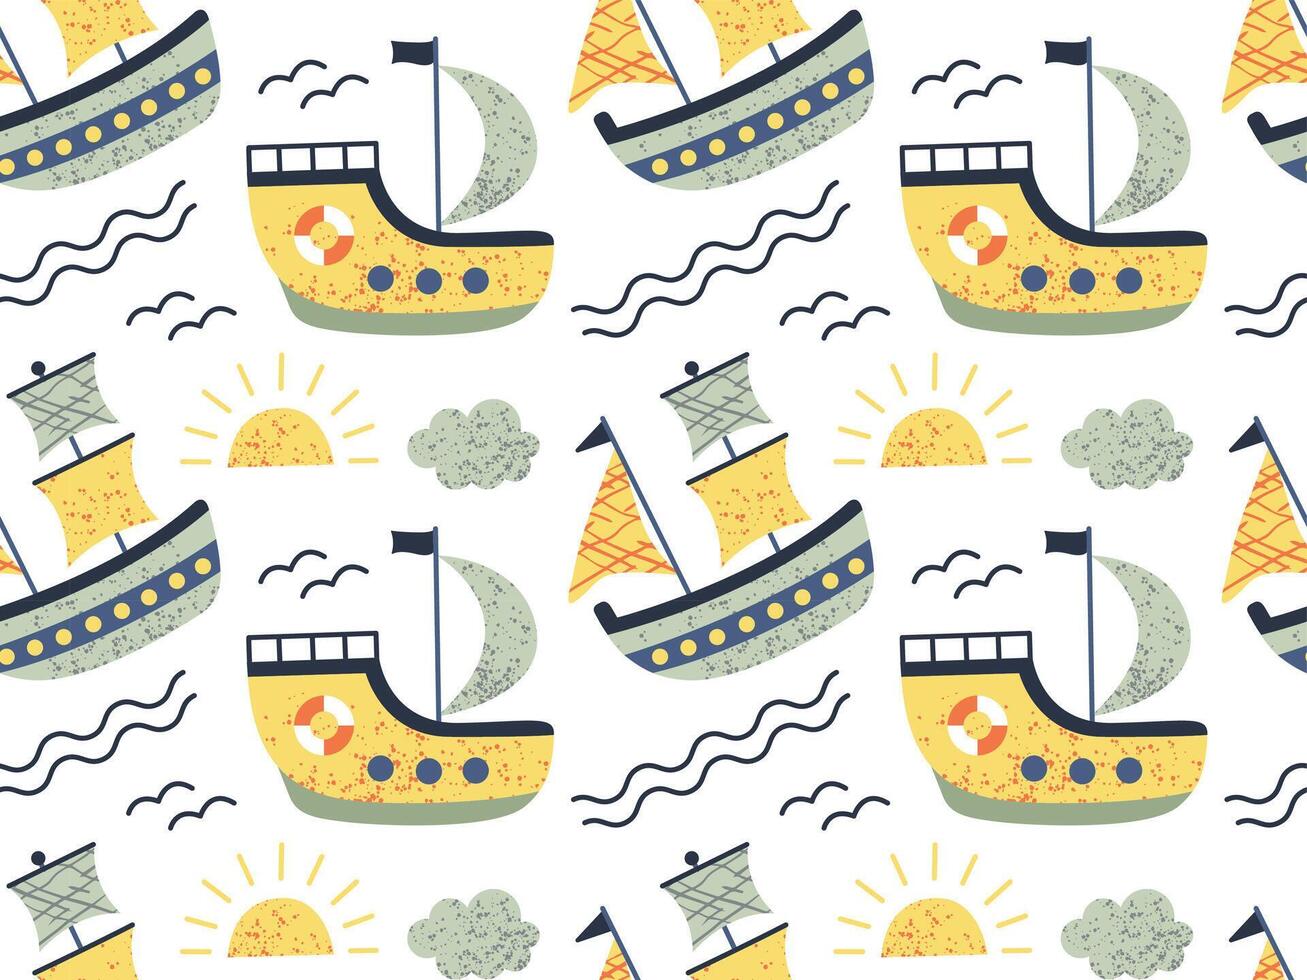 Seamless pattern of ships, sailboat. Doodle style childish ship. Marine transport clipart. Collection of cute ships. vector